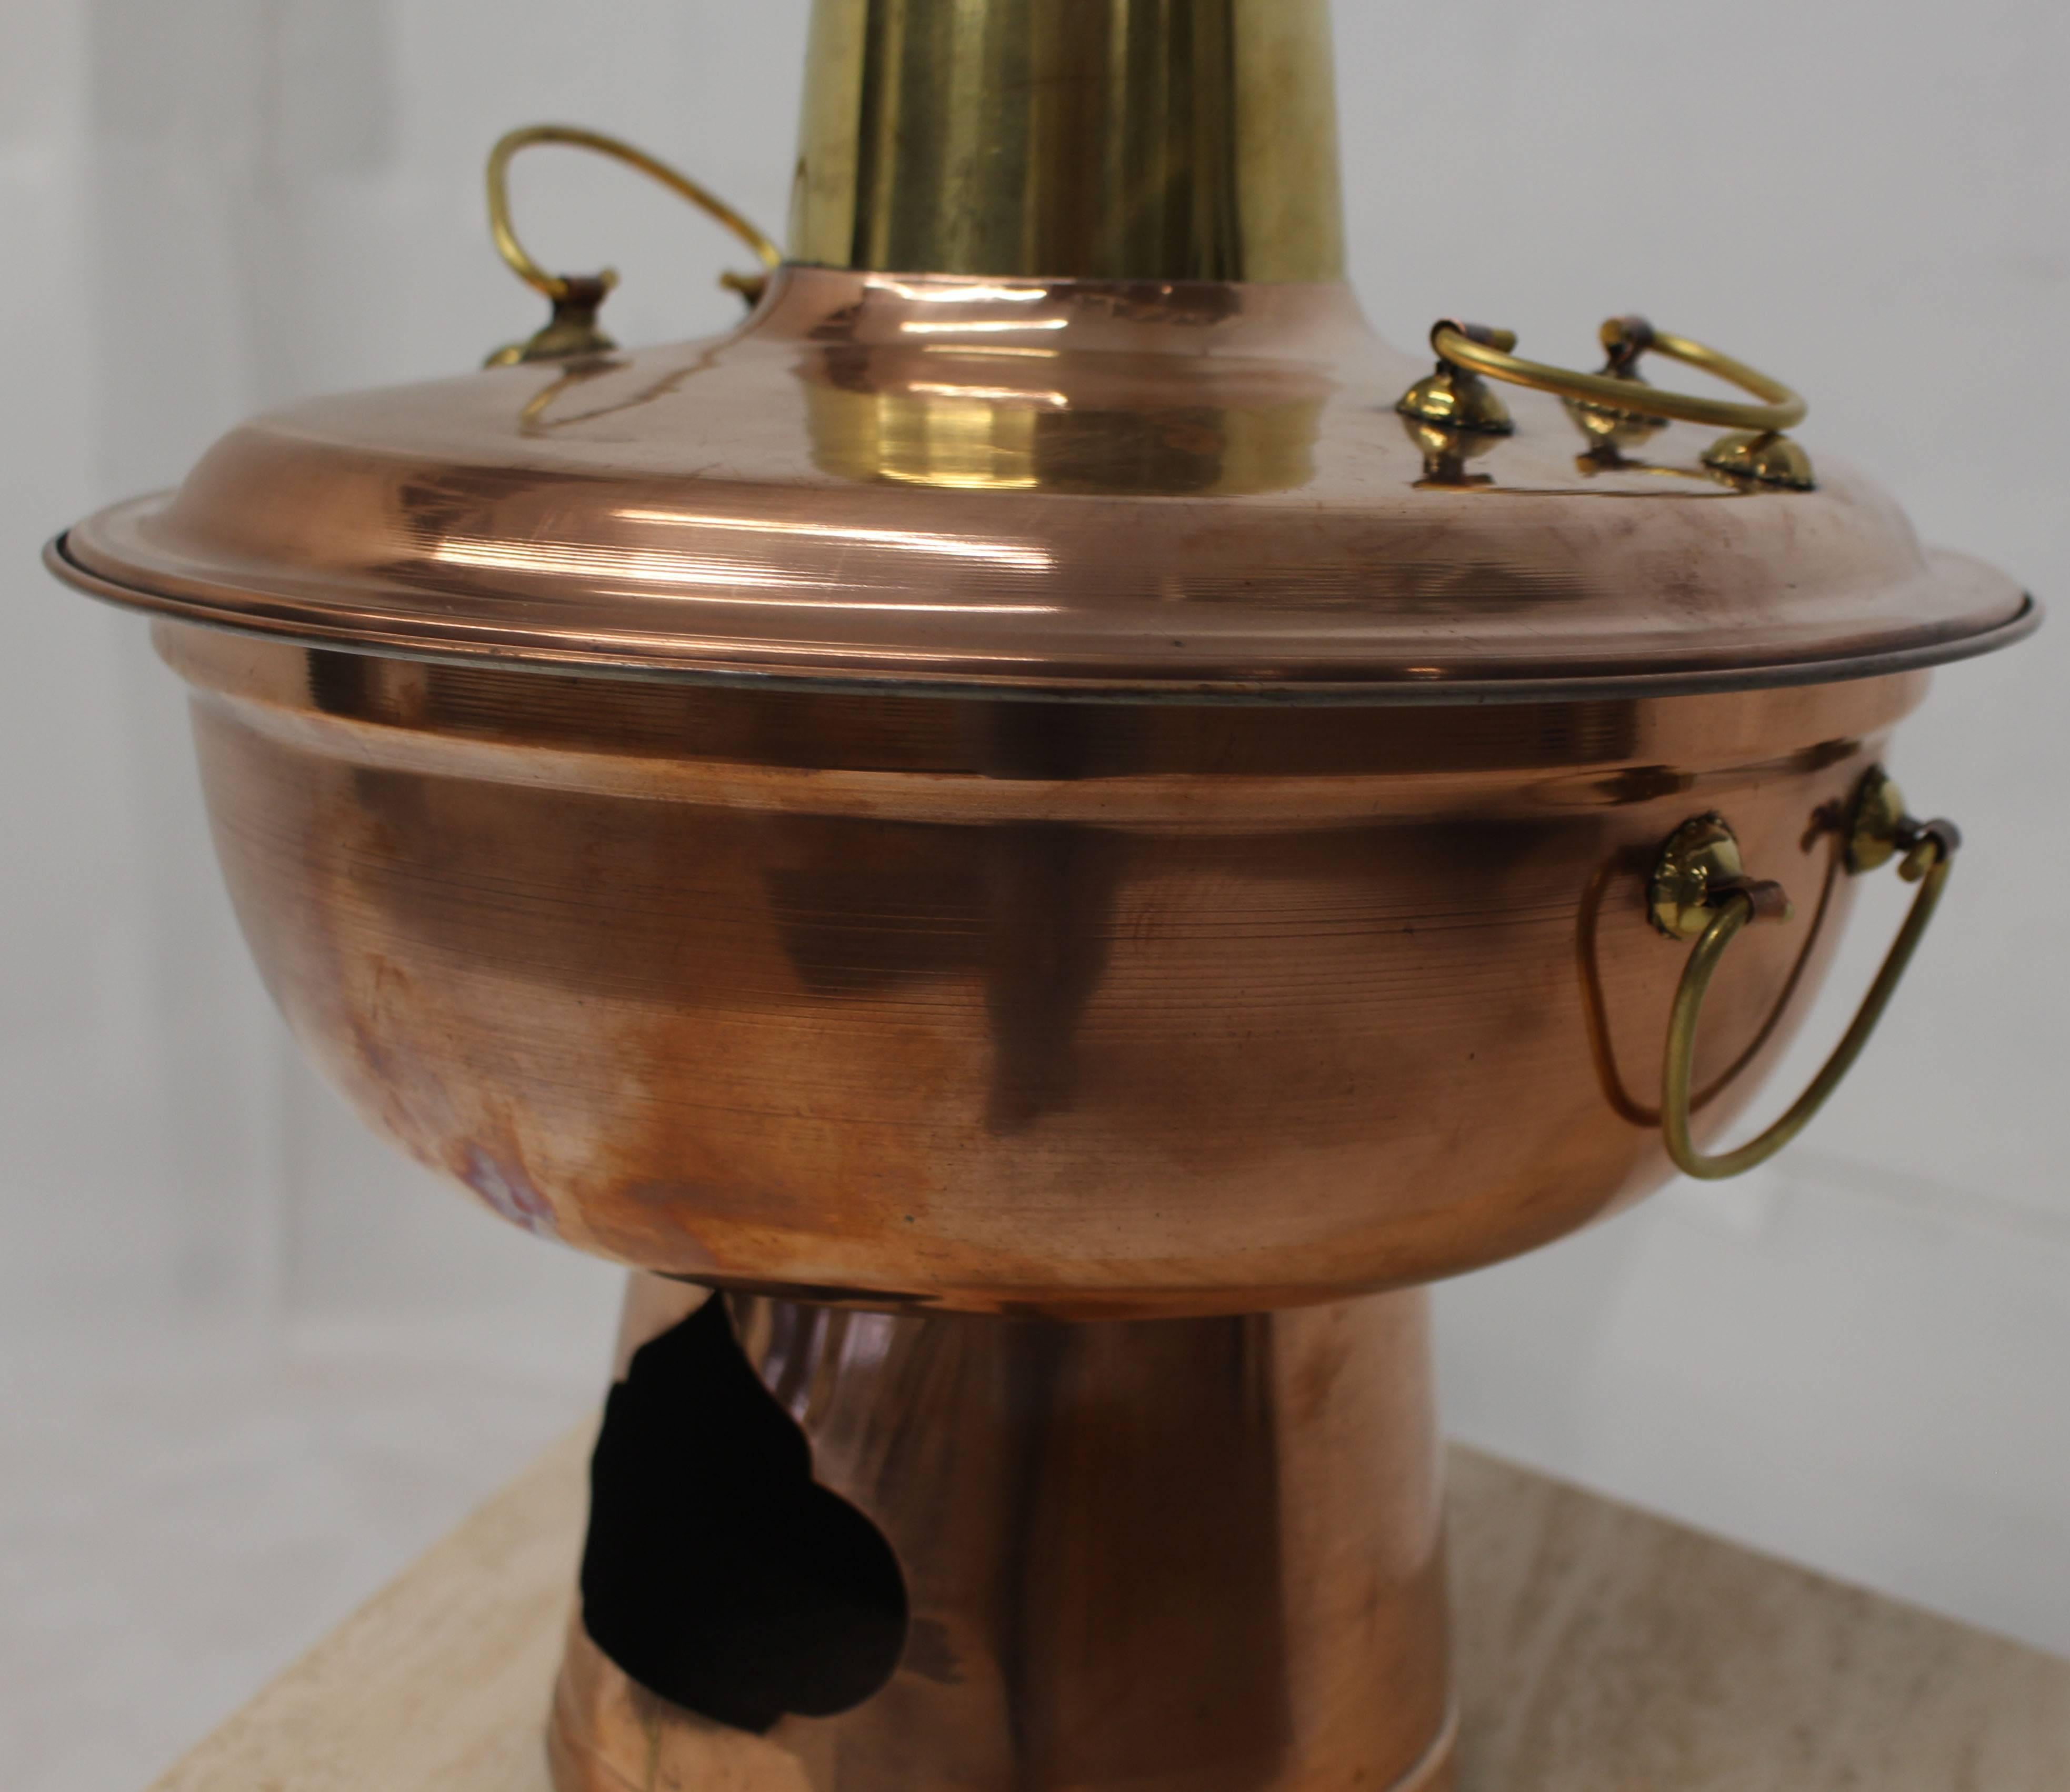 Copper and Brass Coal Burning Food Warmer Removable Chimney Samovar In Good Condition For Sale In Rockaway, NJ